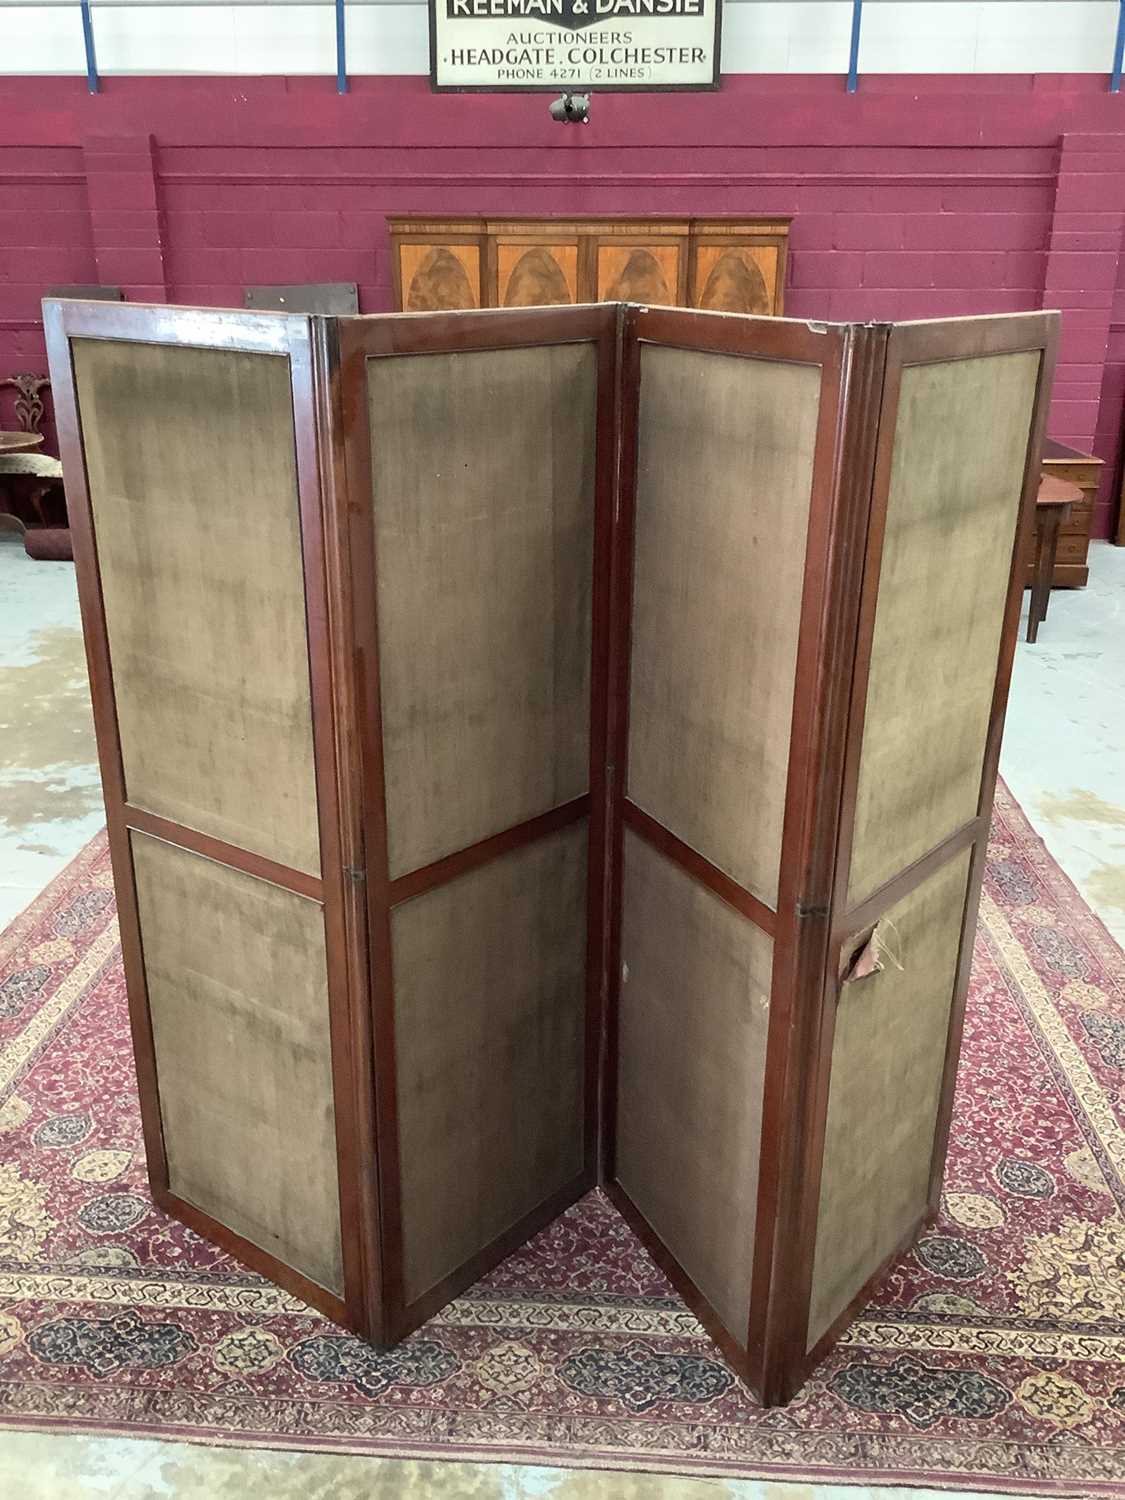 Late 19th/early 20th century mahogany framed brass mounted four-fold screen